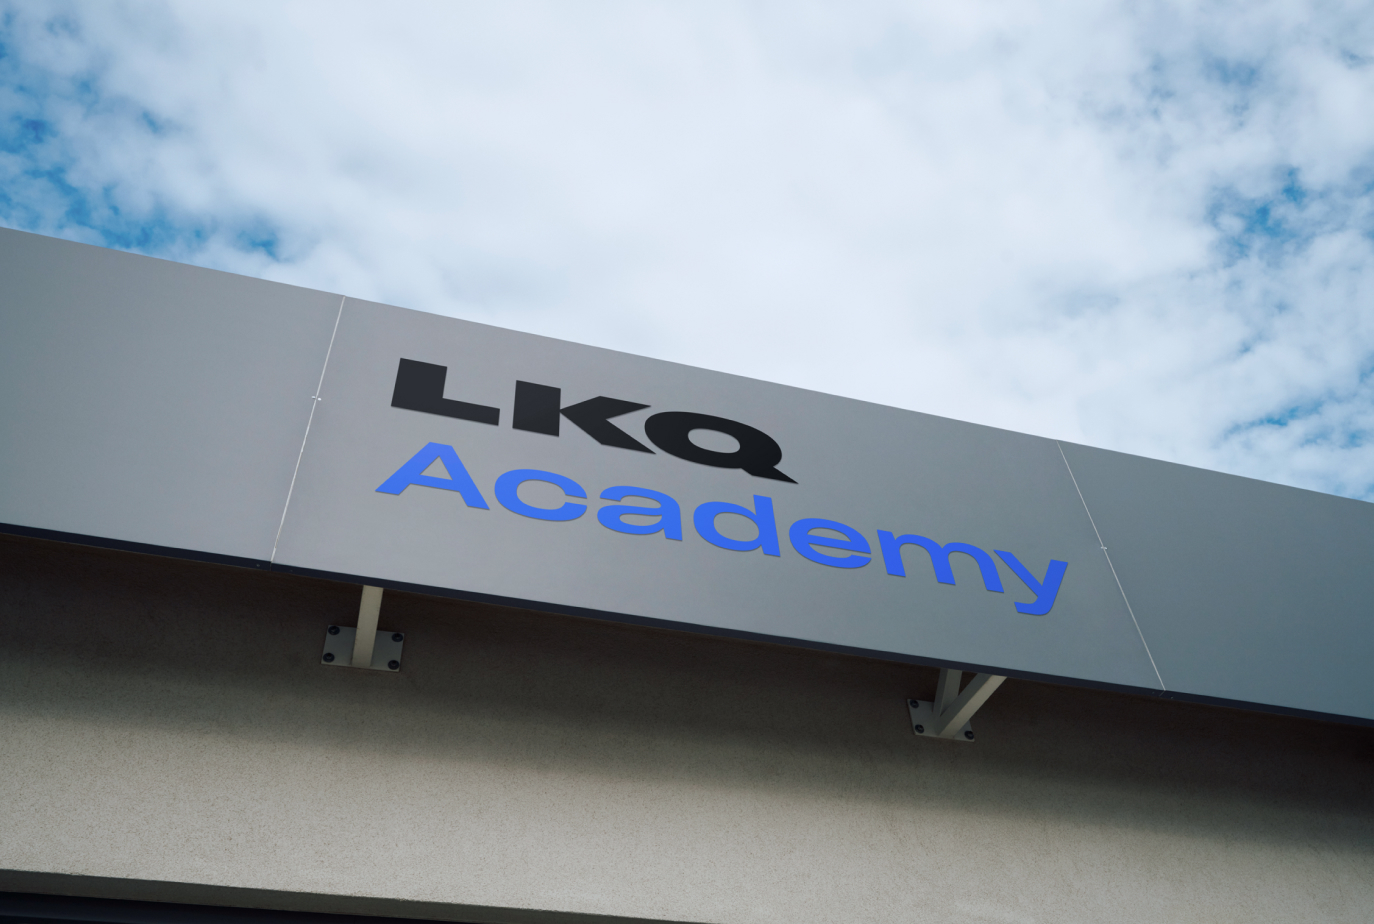 LKQ Academy sign from outside